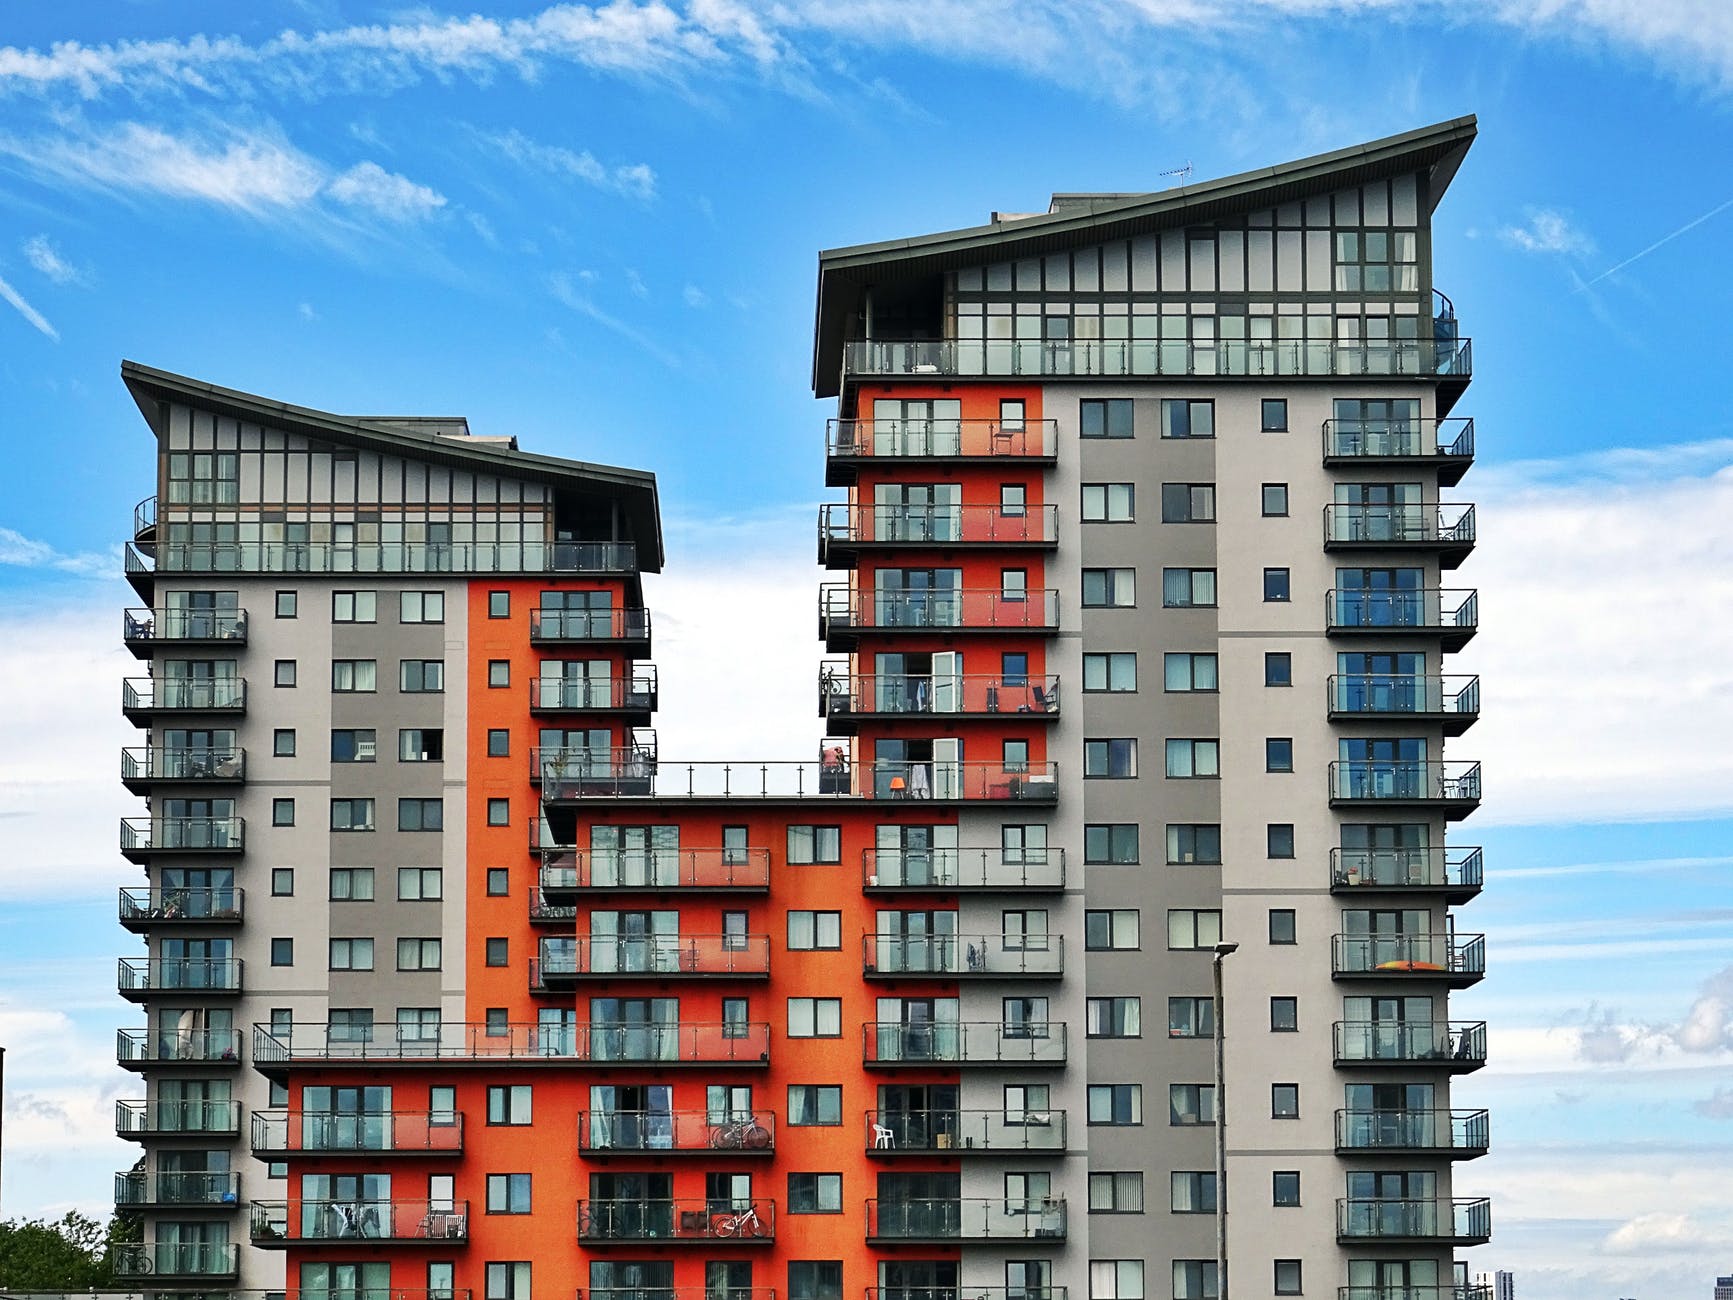 What Are The Pros And Cons Of Investing In Multifamily In 2021?